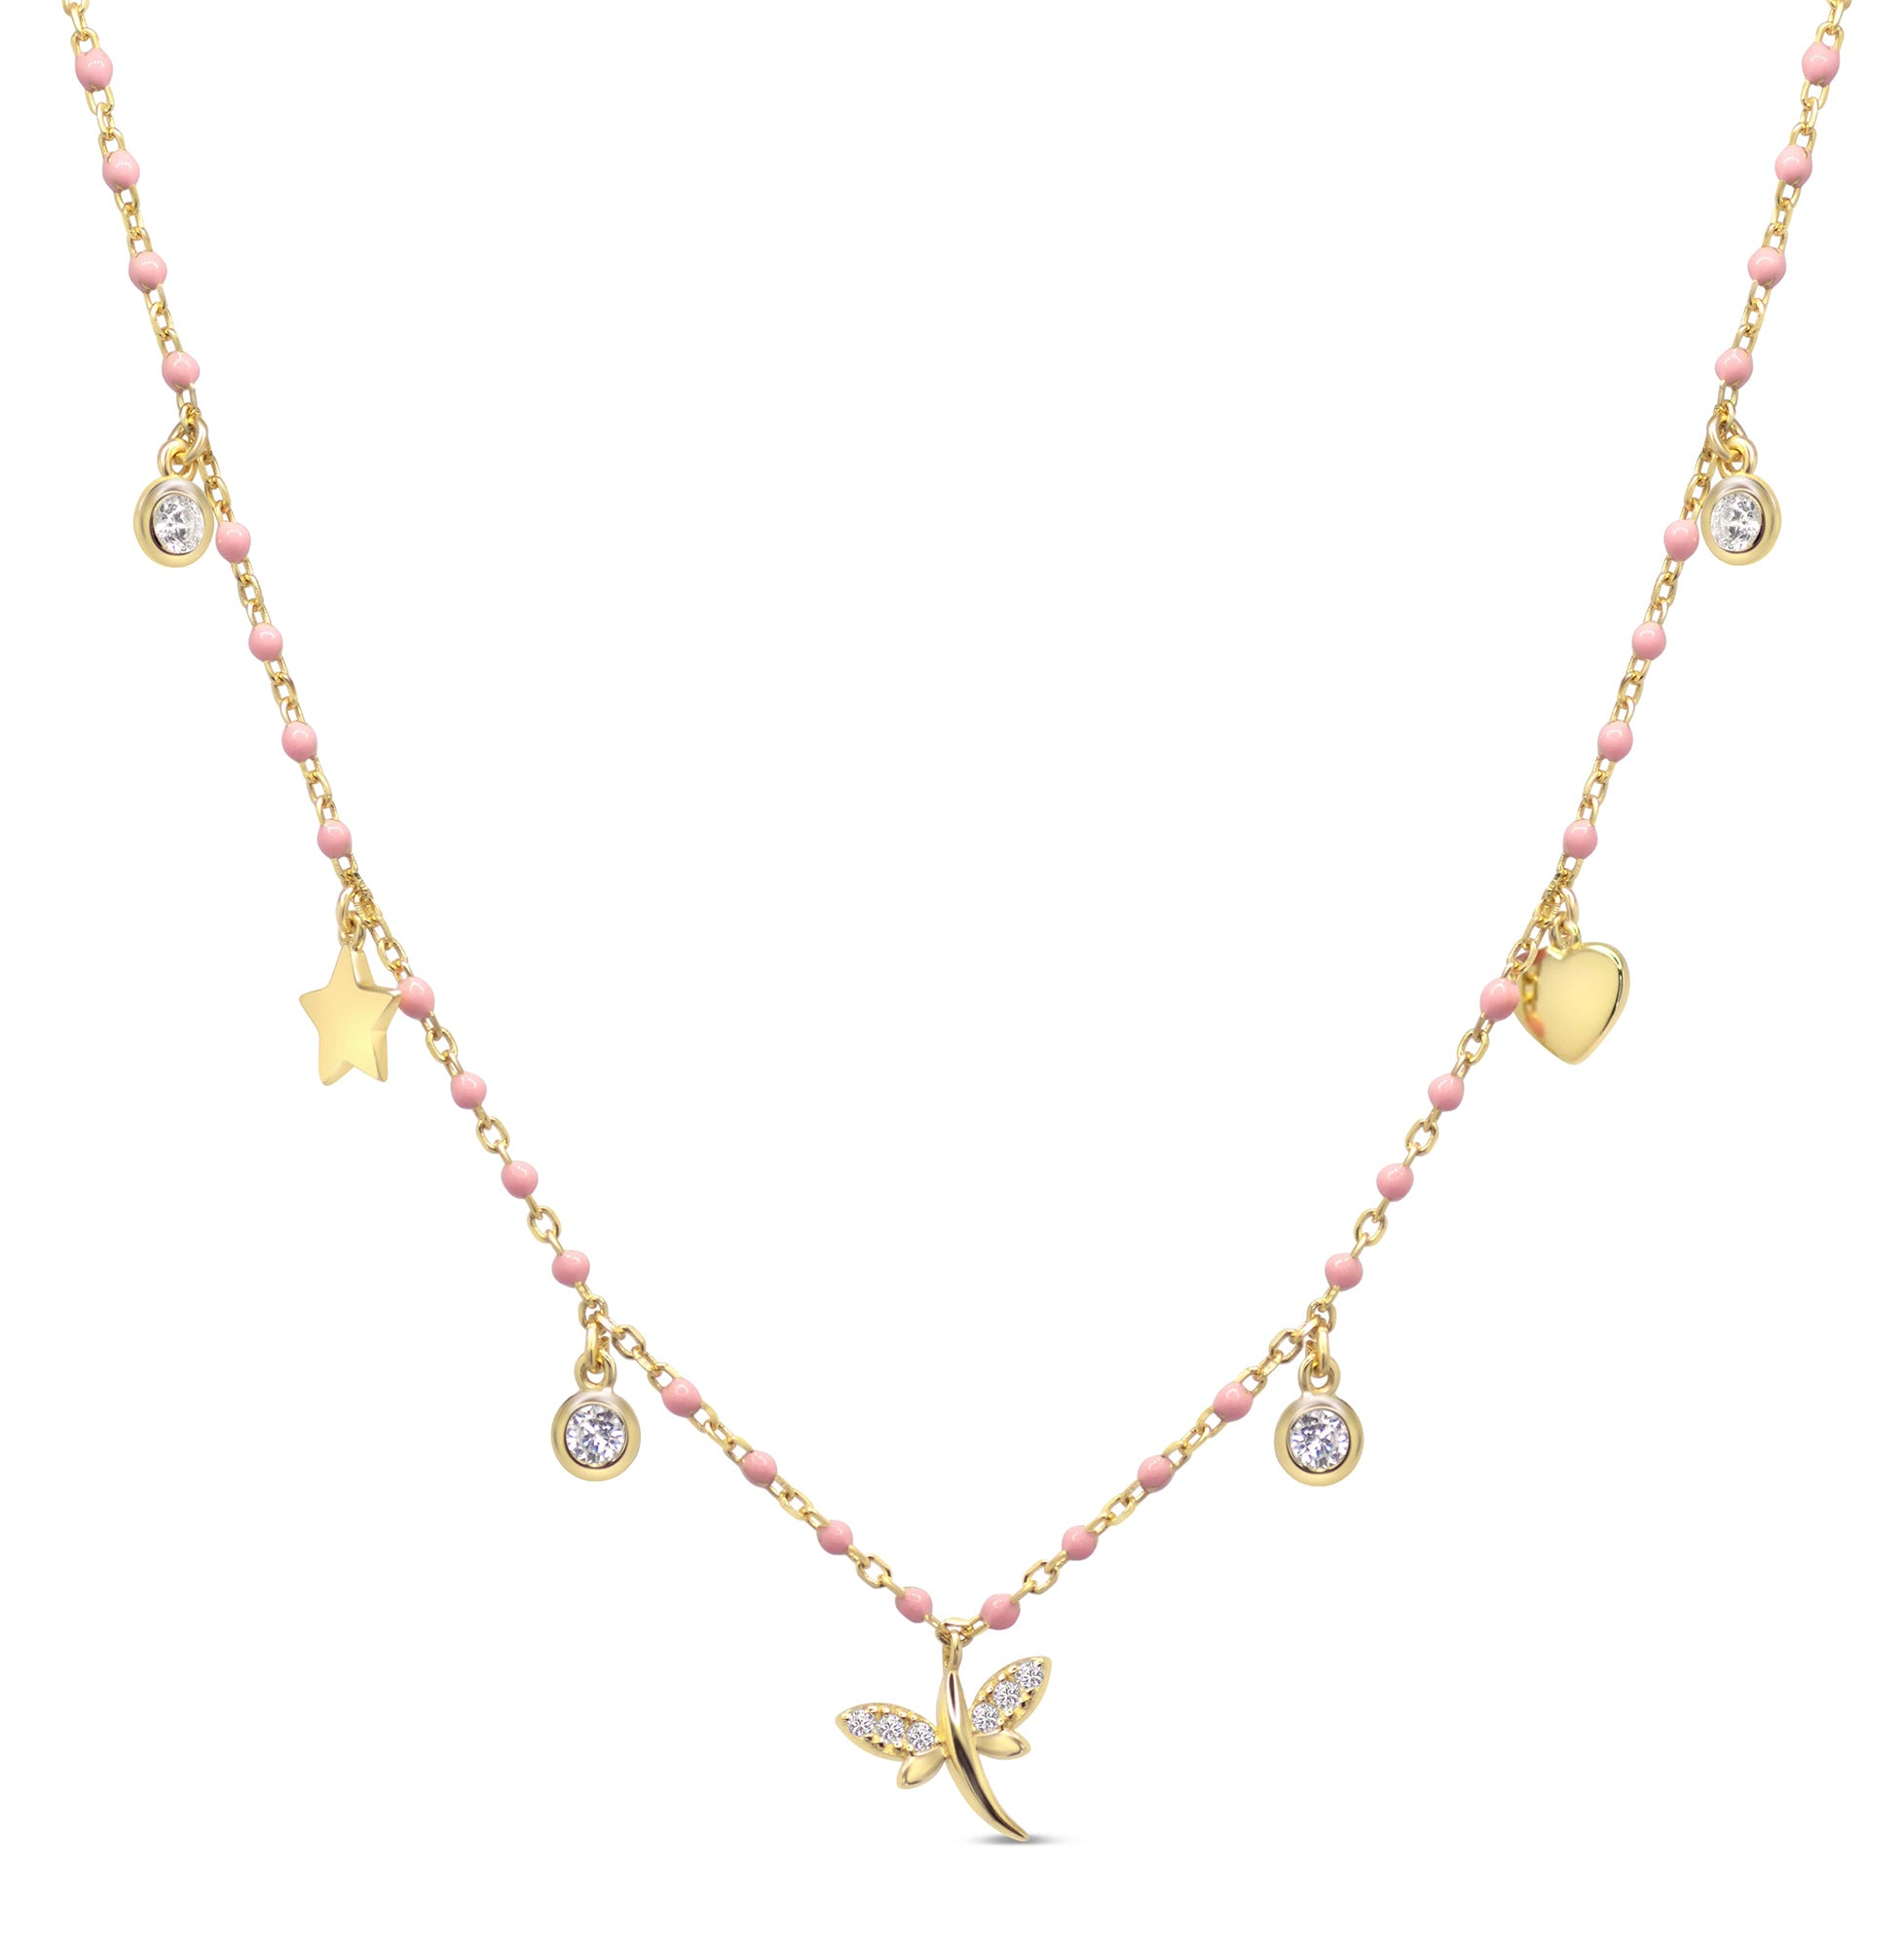 Pink and gold charm necklace